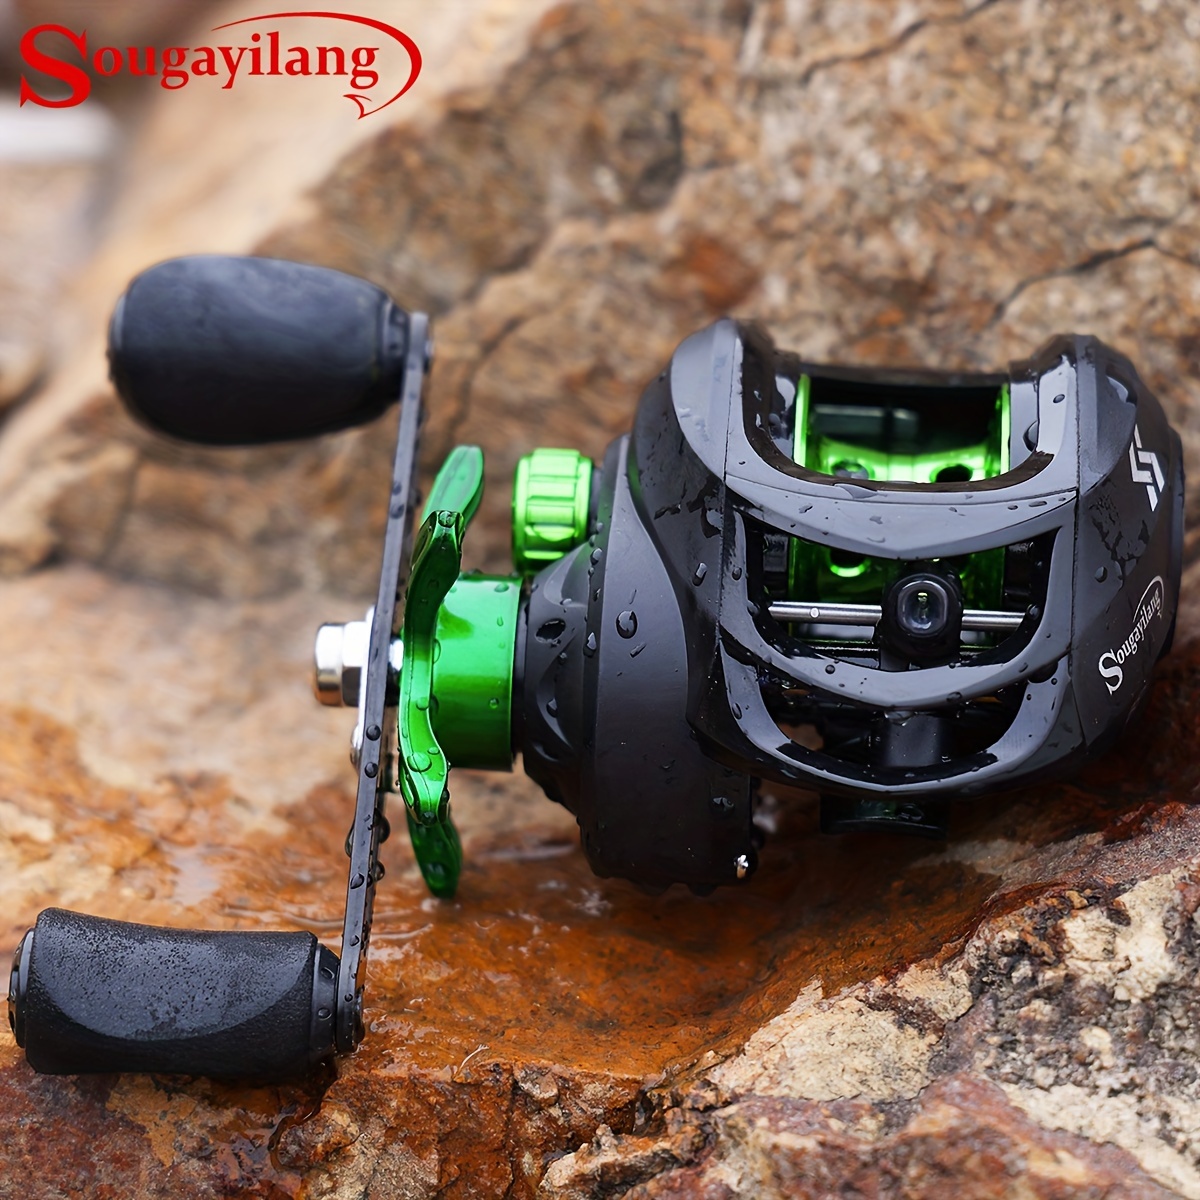 

Sougayilang 1pc 7.2:1 Gear Ratio Aluminum Baitcasting Reel, Green Fishing Reel With Magnetic Brake System For Freshwater